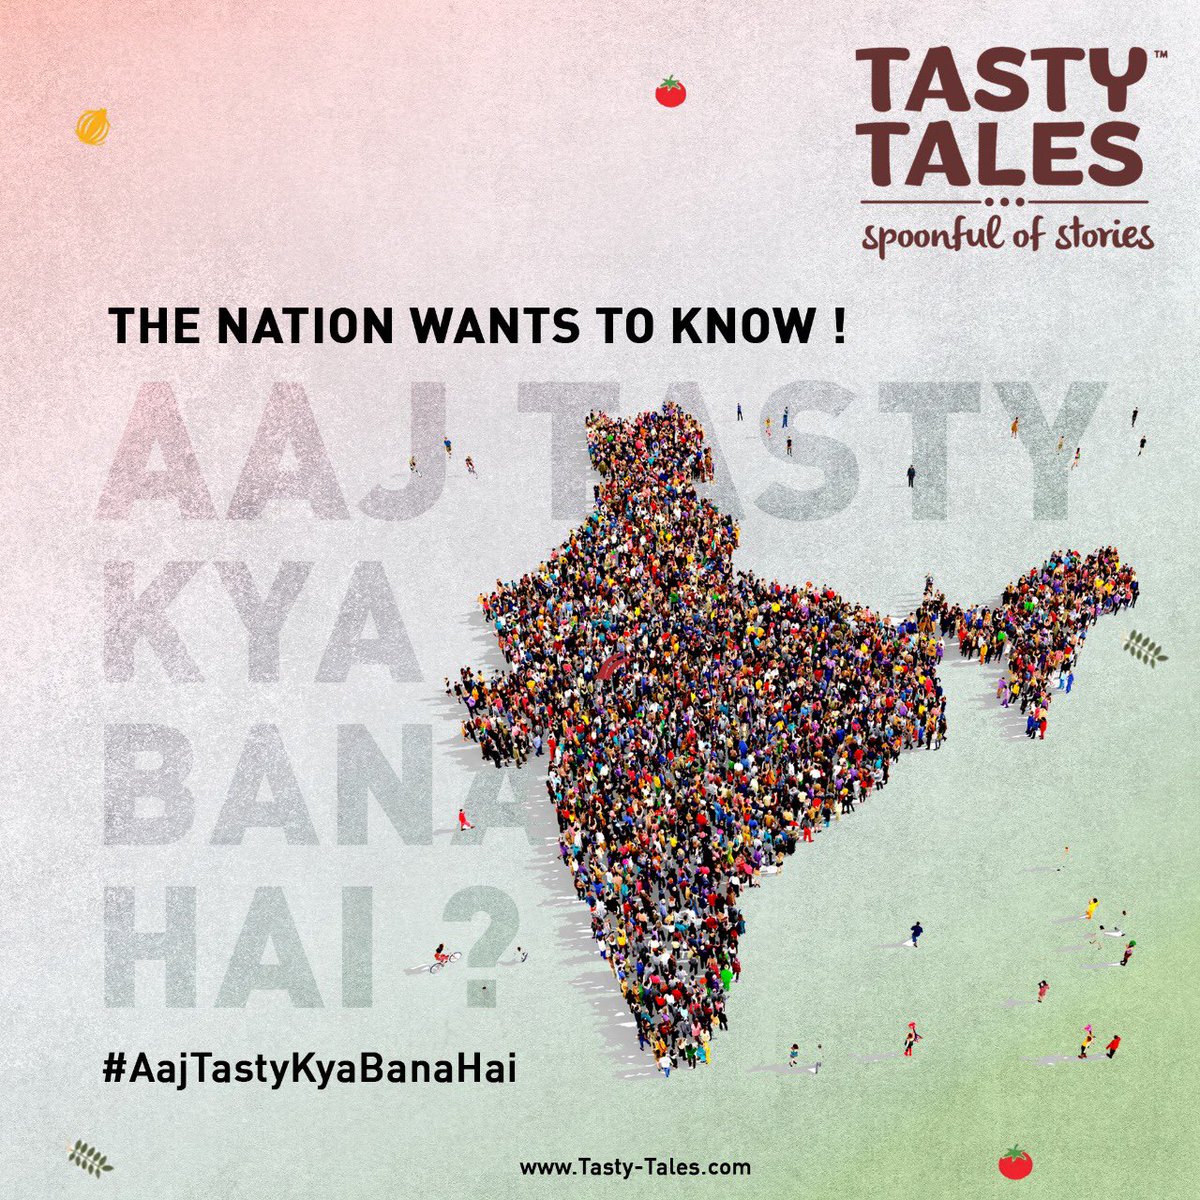 The Nation wants to know the answer to one question which is “Aaj Khane mei Tasty kya bana hai?” What’s your answer going to be? Stay tuned to find out. #AajTastykyabanahai #TastyTales #Spoonfulofstories #readytocook #readyin20mintues #authenticcurrypastes